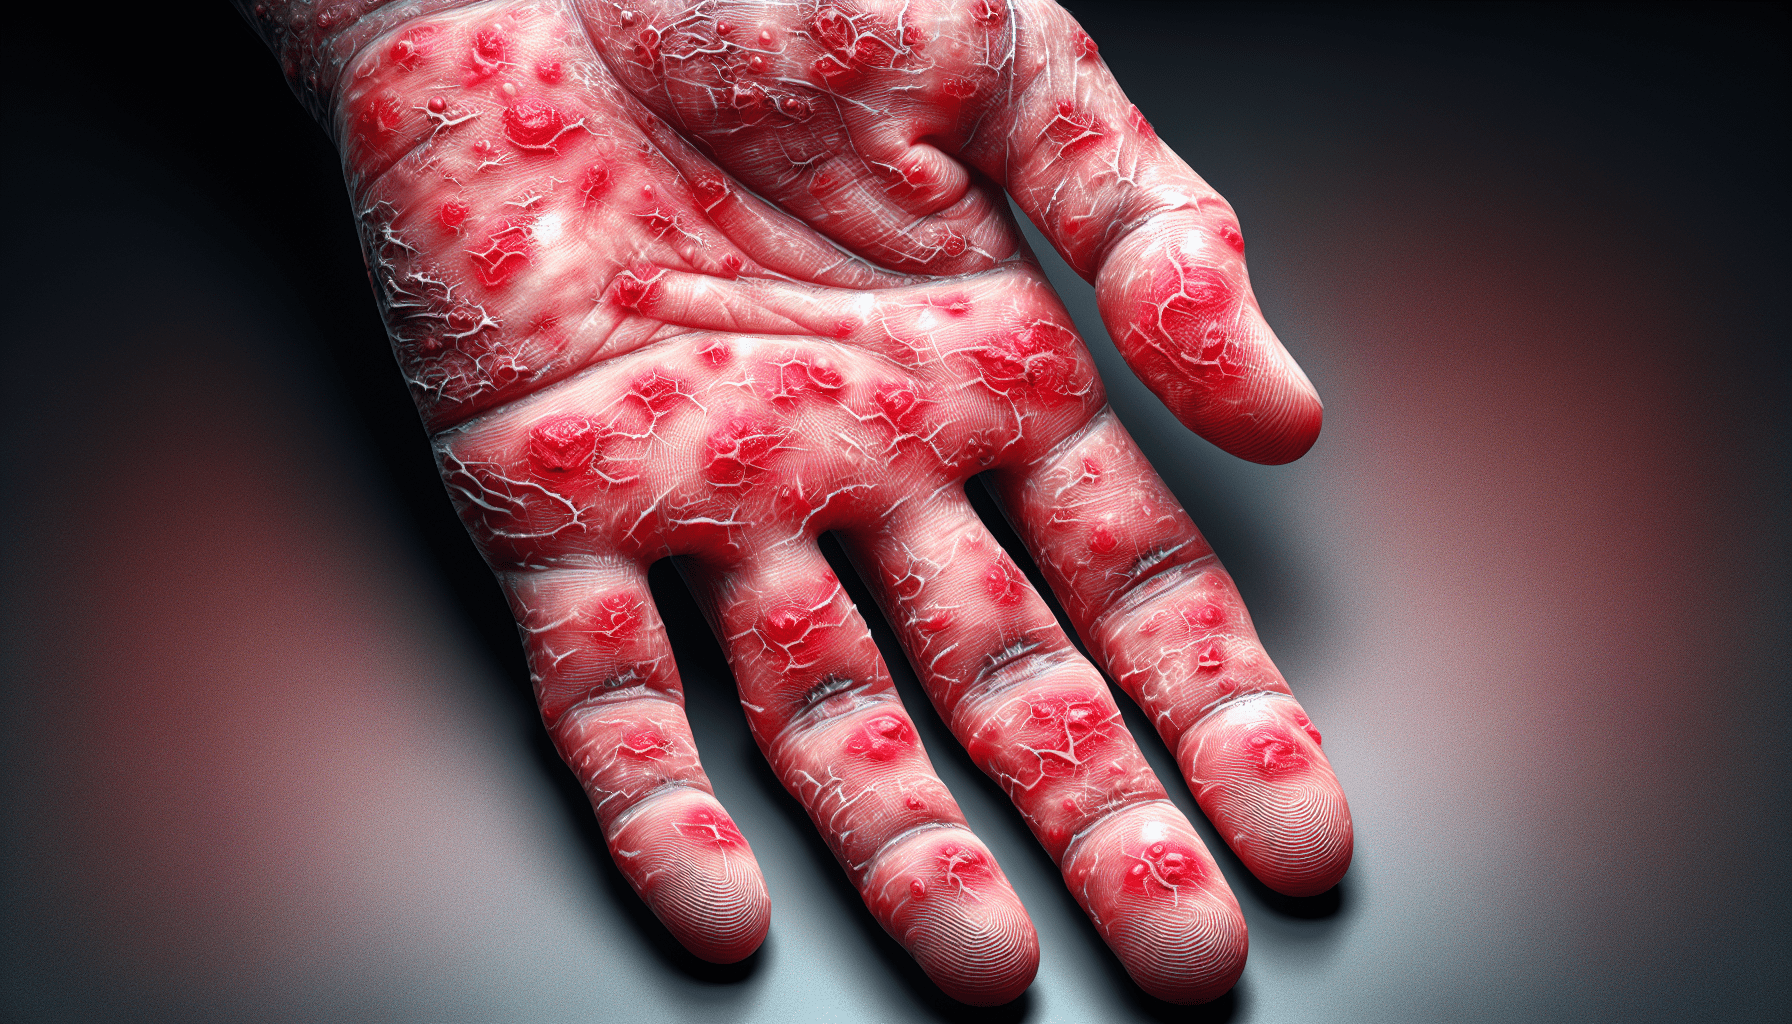 How Does Eczema Affect The Body Over Time?